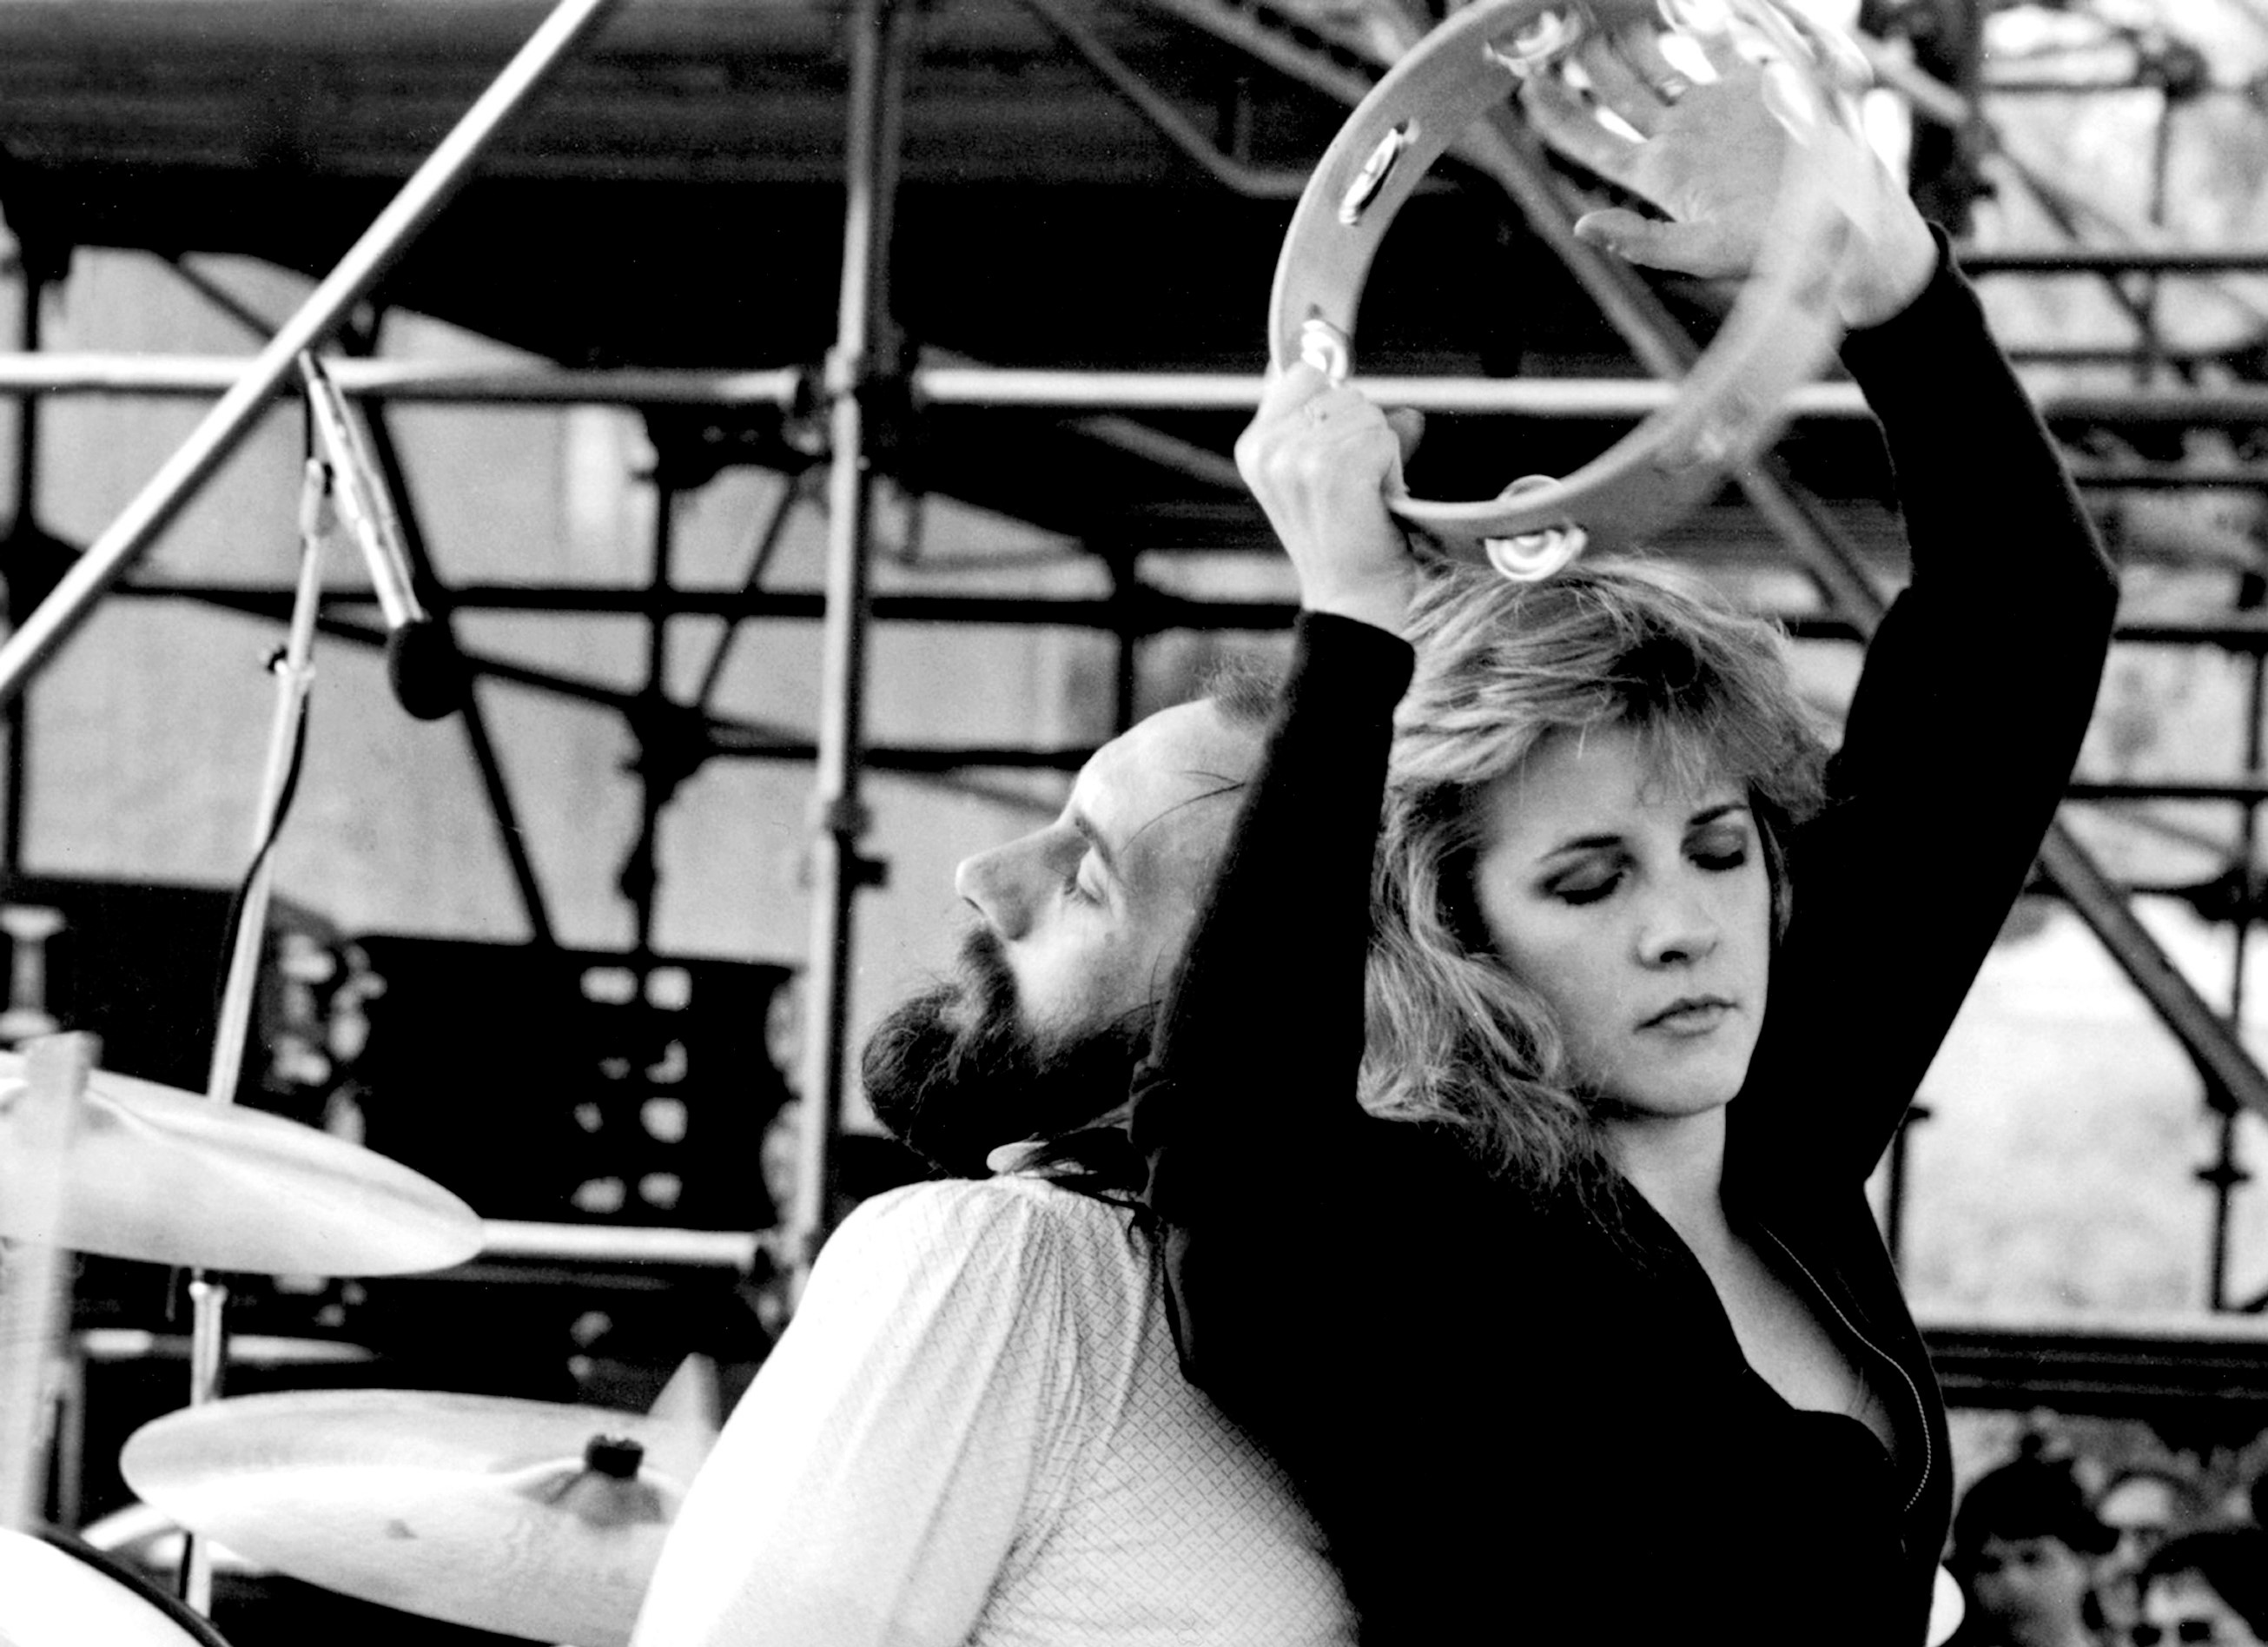 Stevie Nicks and Mick Fleetwood are back to back. Nicks holds a tambourine above her head and Fleetwood plays drums.